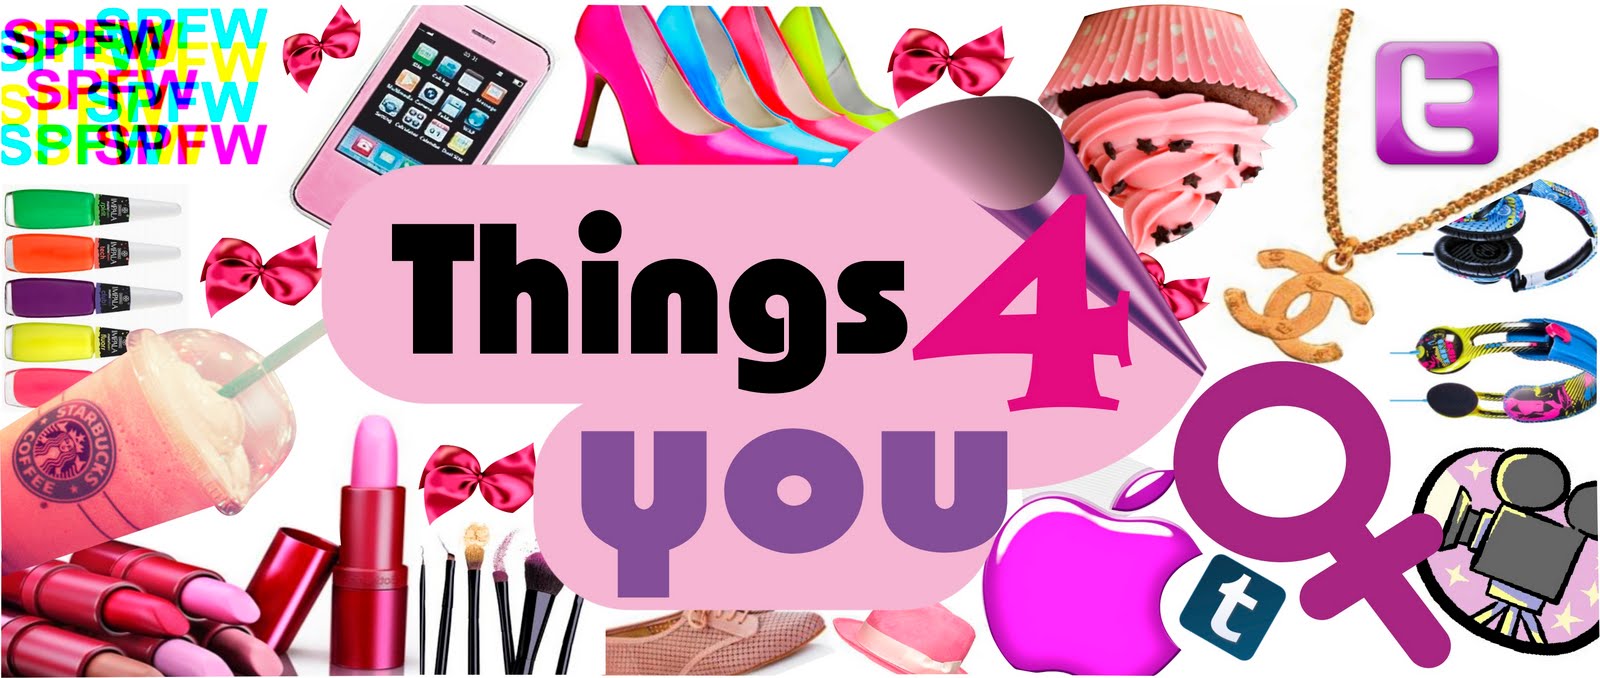 Things 4 You!